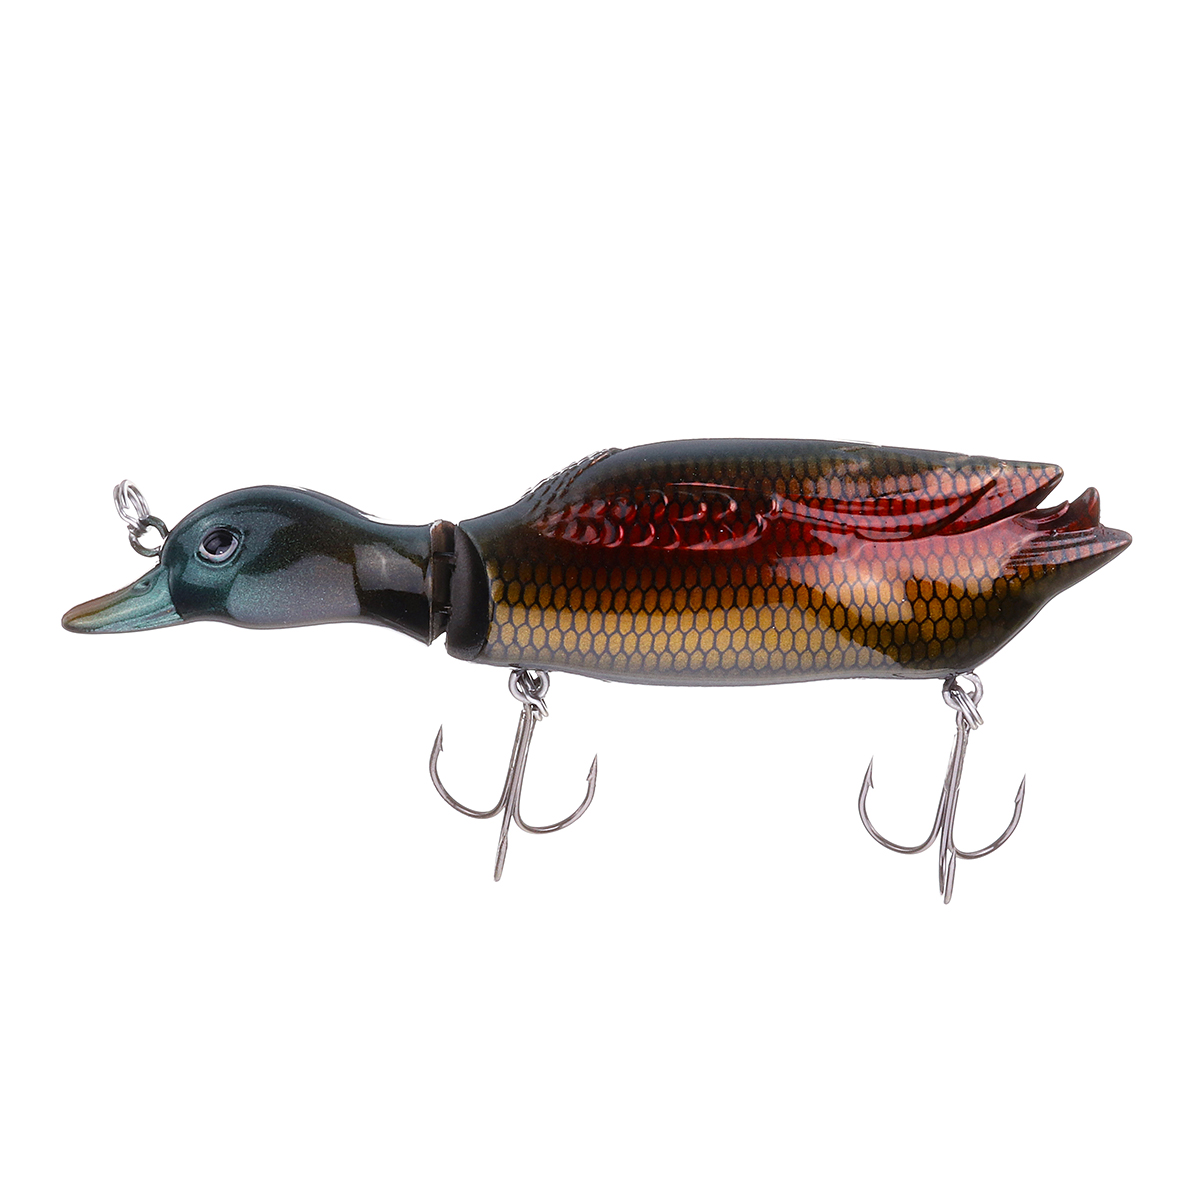 1PC-ZANLURE-5-13CM-59g-3D-Duck-Artificial-Fishing-Lure-With-Hooks--Hard-Baits-Minnow-Topwater-Wobble-1646056-9